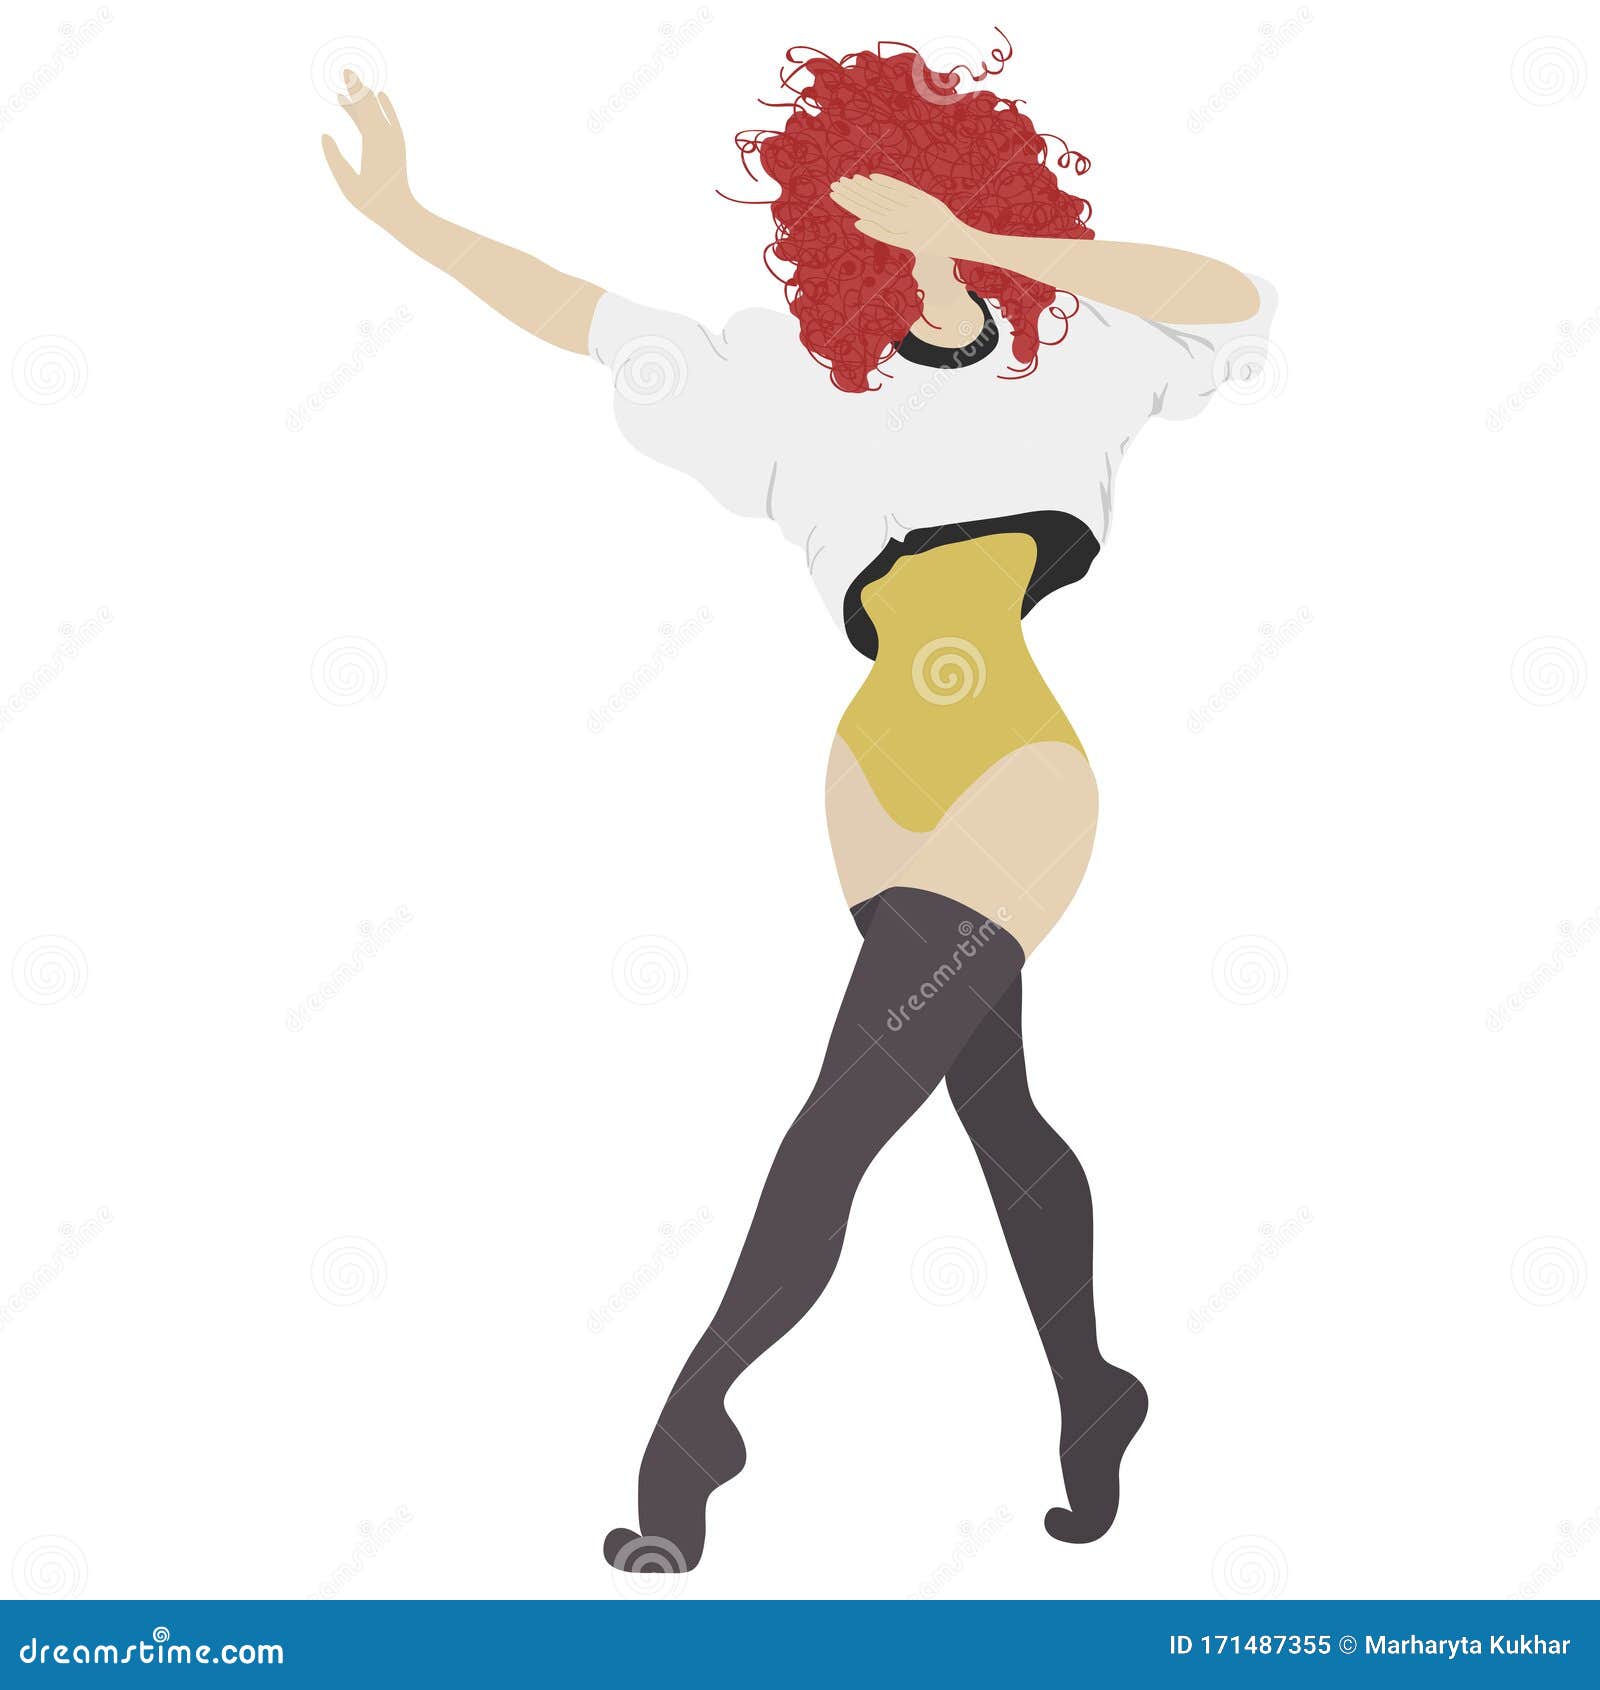 Young Girl with Red Curly Hair Dancing. Stylish Woman Moving Like in Dance  Studio or Party Stock Vector - Illustration of character, colorful:  171487355